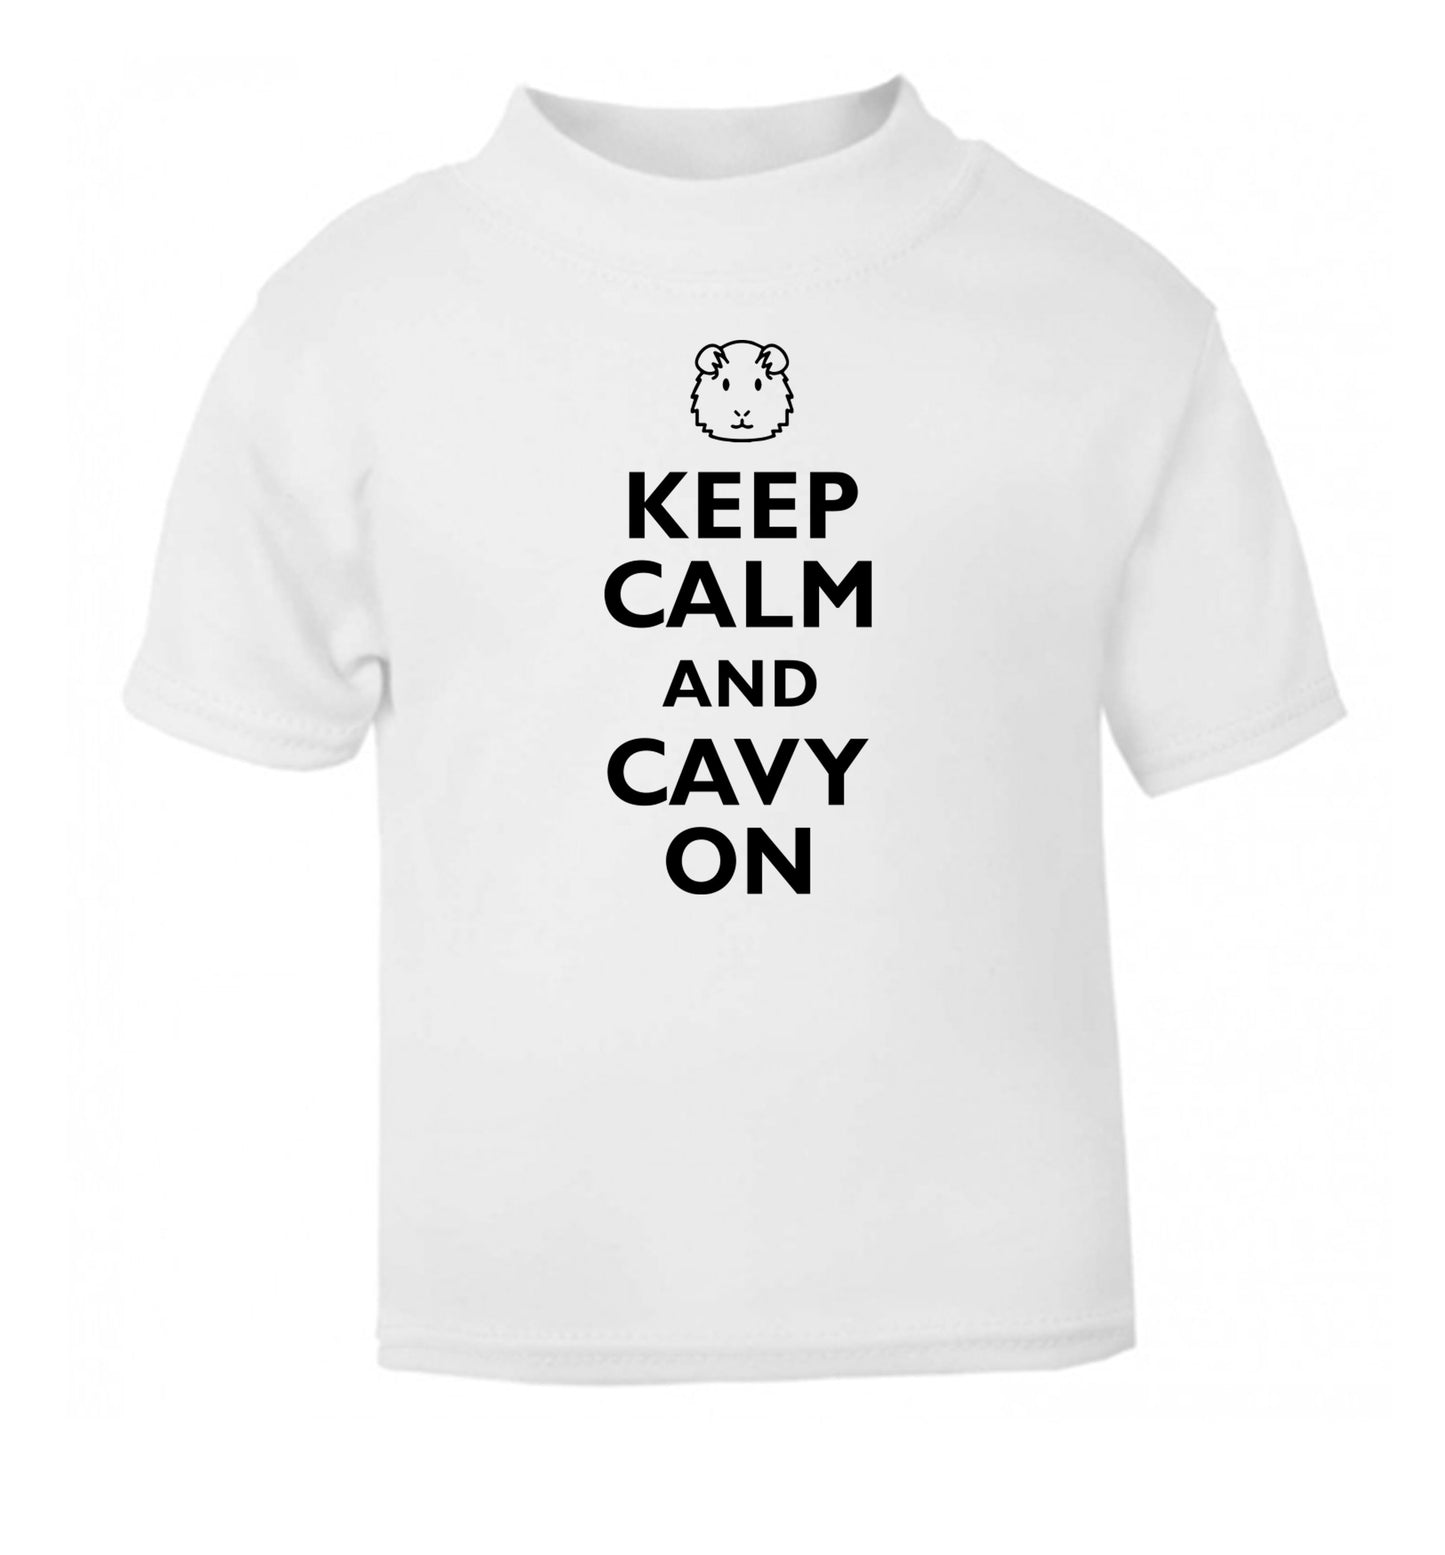 Keep calm and cavvy on white Baby Toddler Tshirt 2 Years